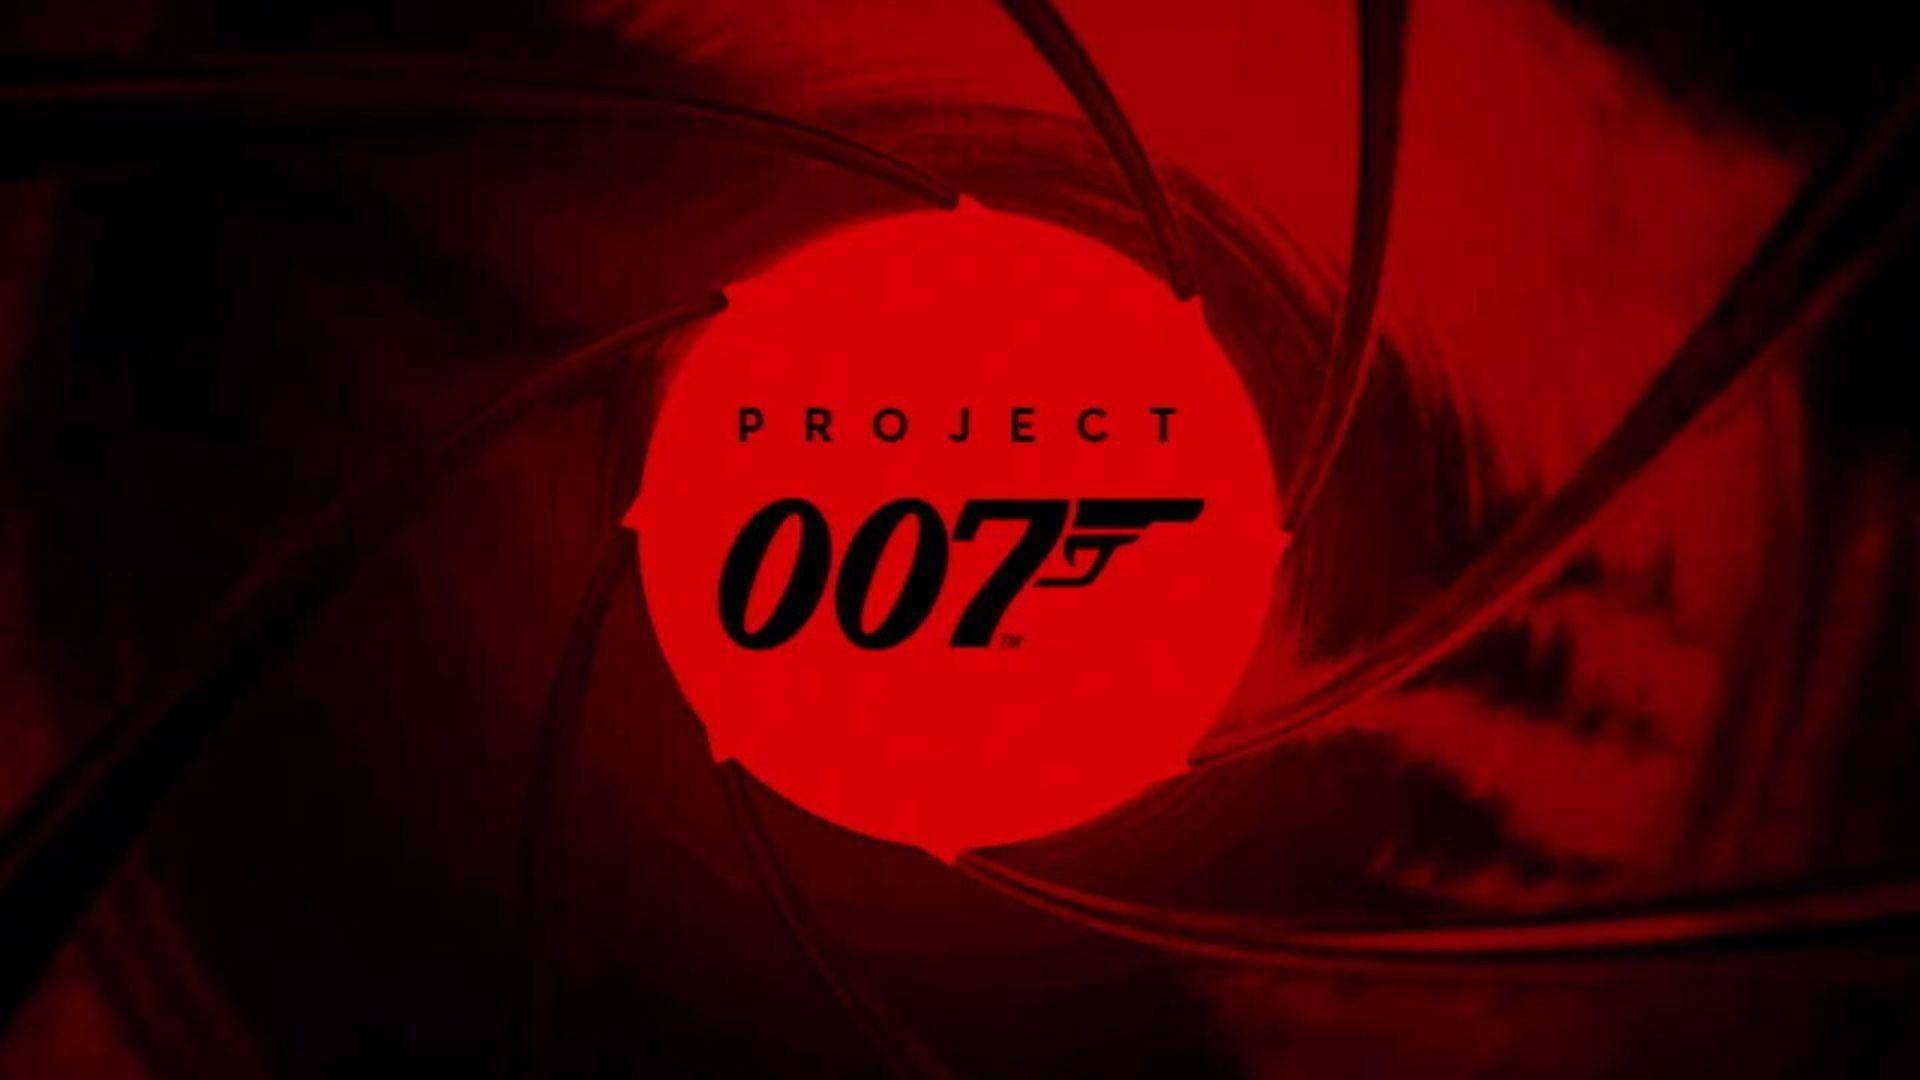 IO Interactive seems to be quite ambitious with Project 007